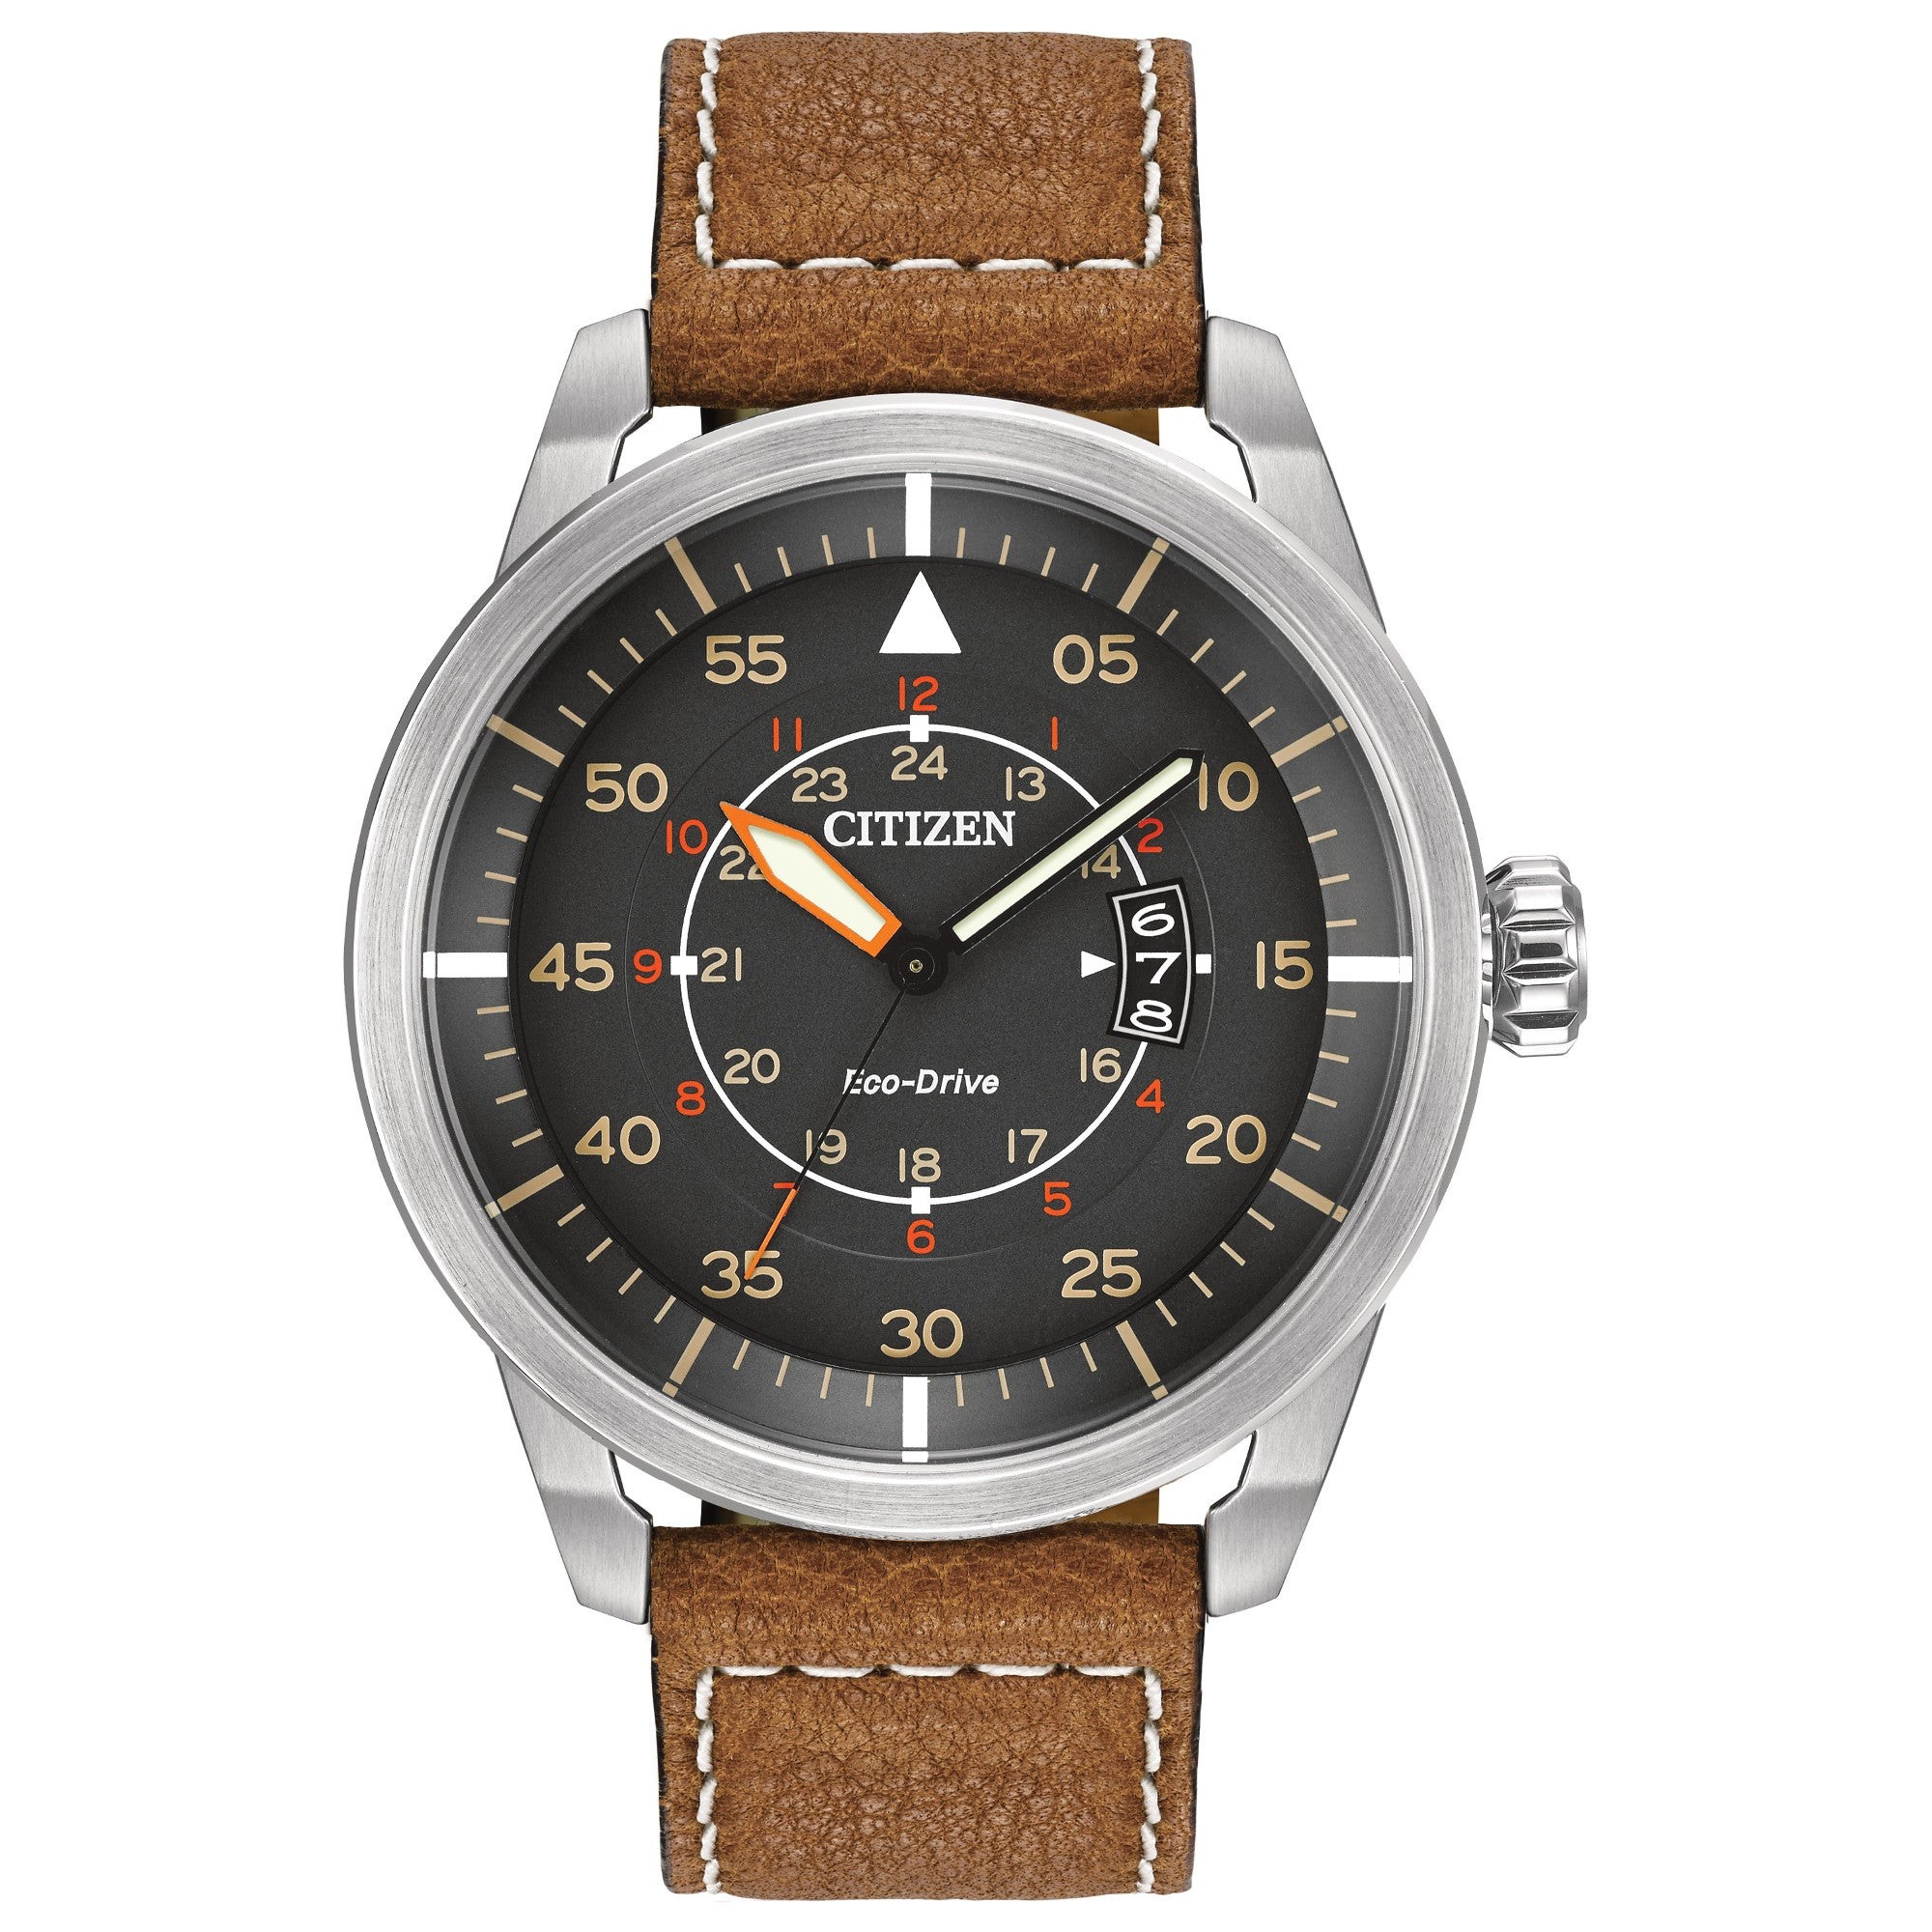 Mens Avion Eco-Drive Brown Leather Strap Watch Dark Gray Dial